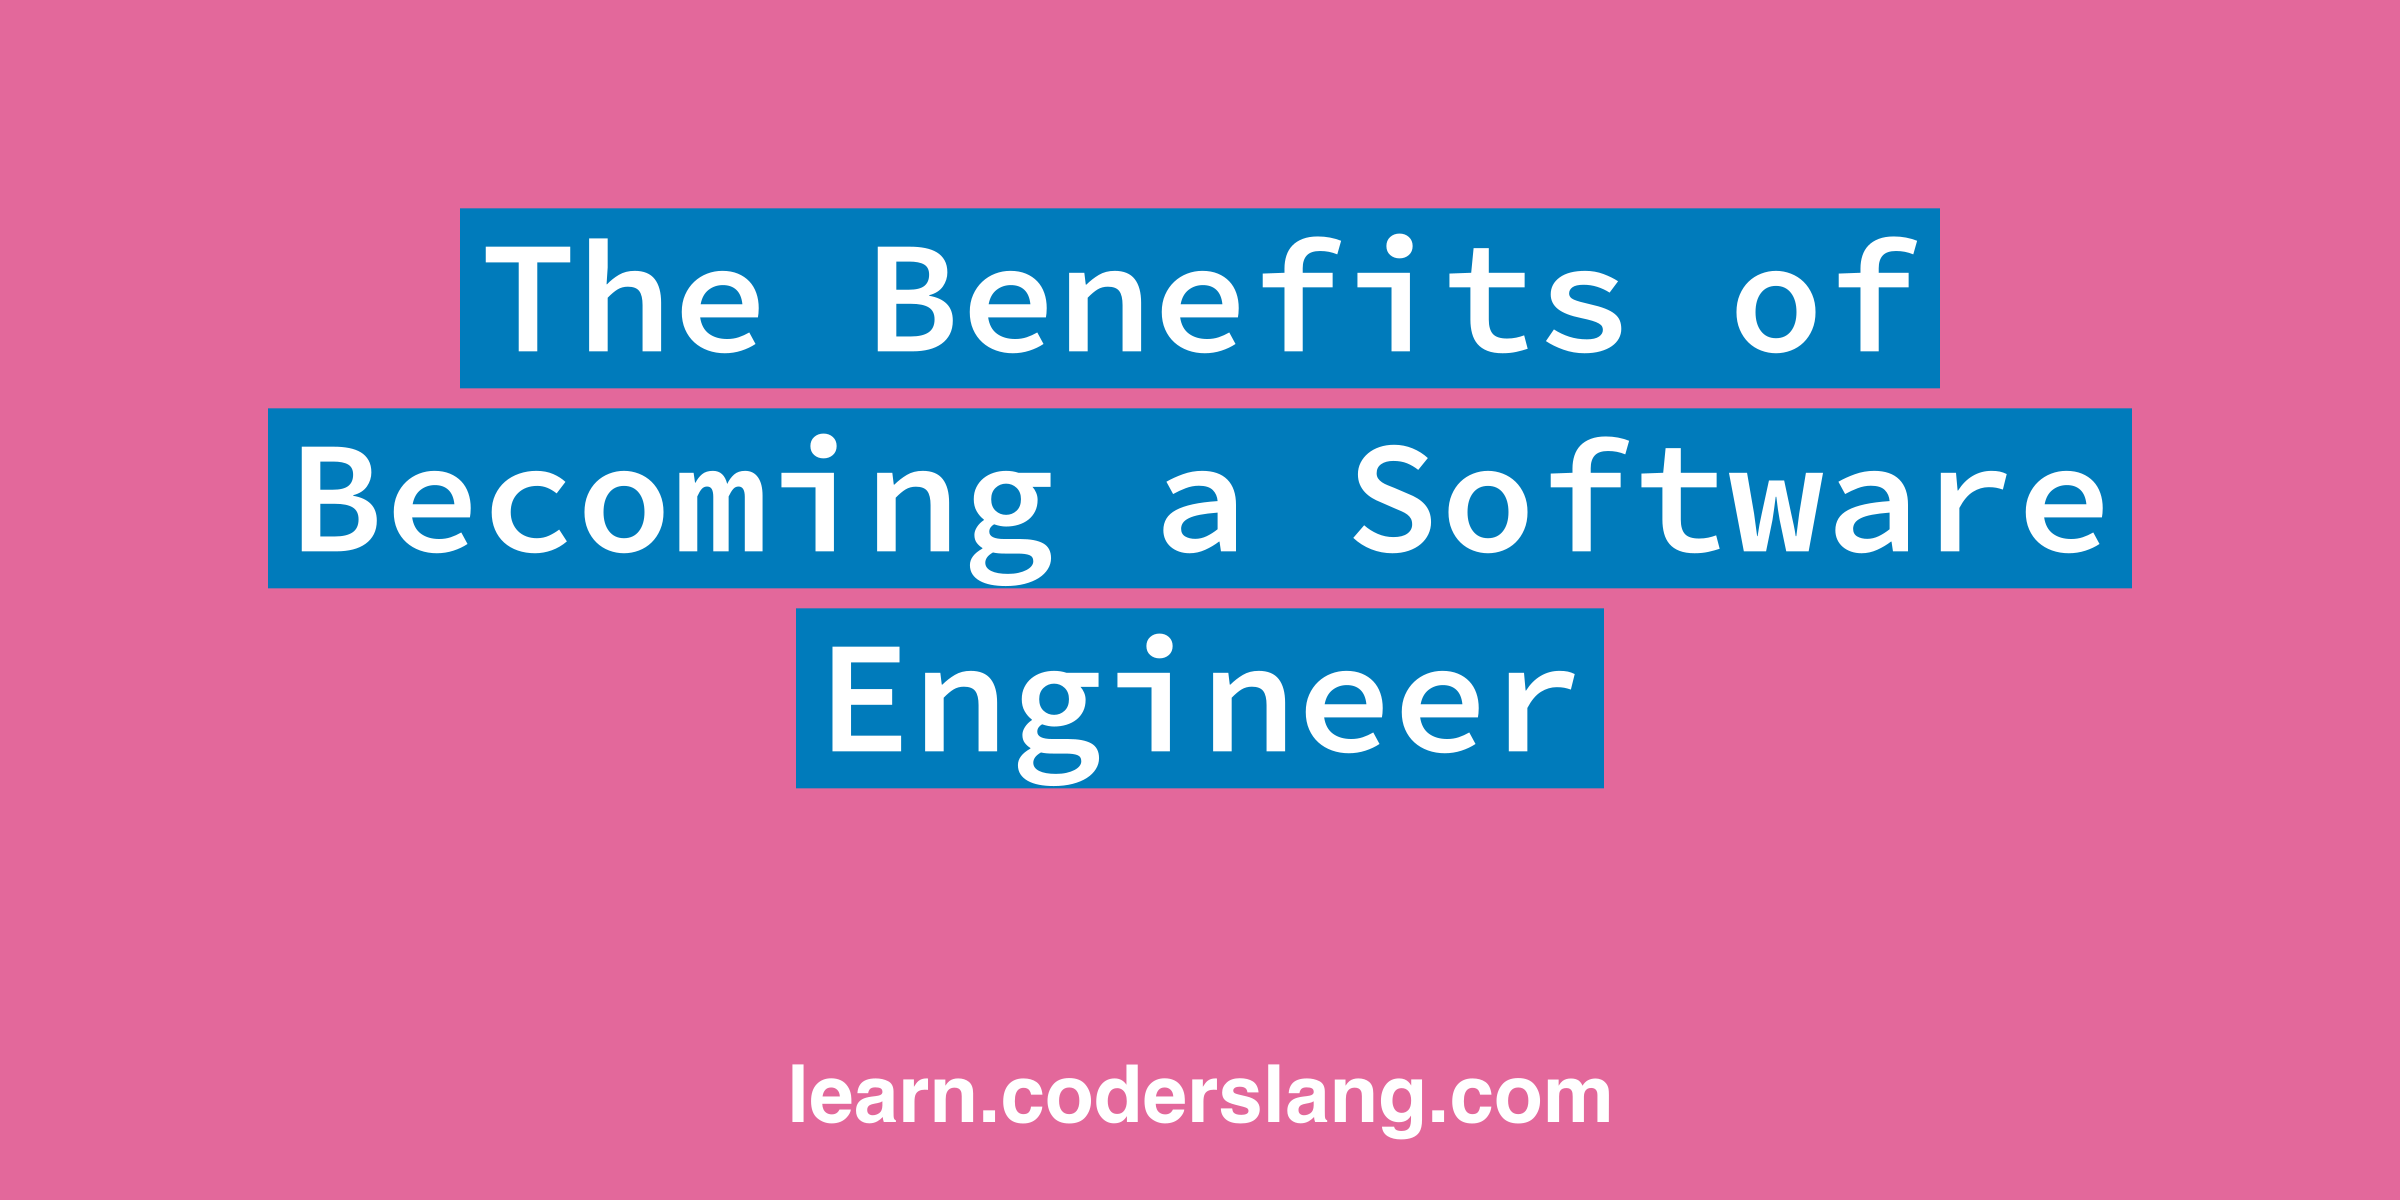 The Benefits of Becoming a Software Engineer